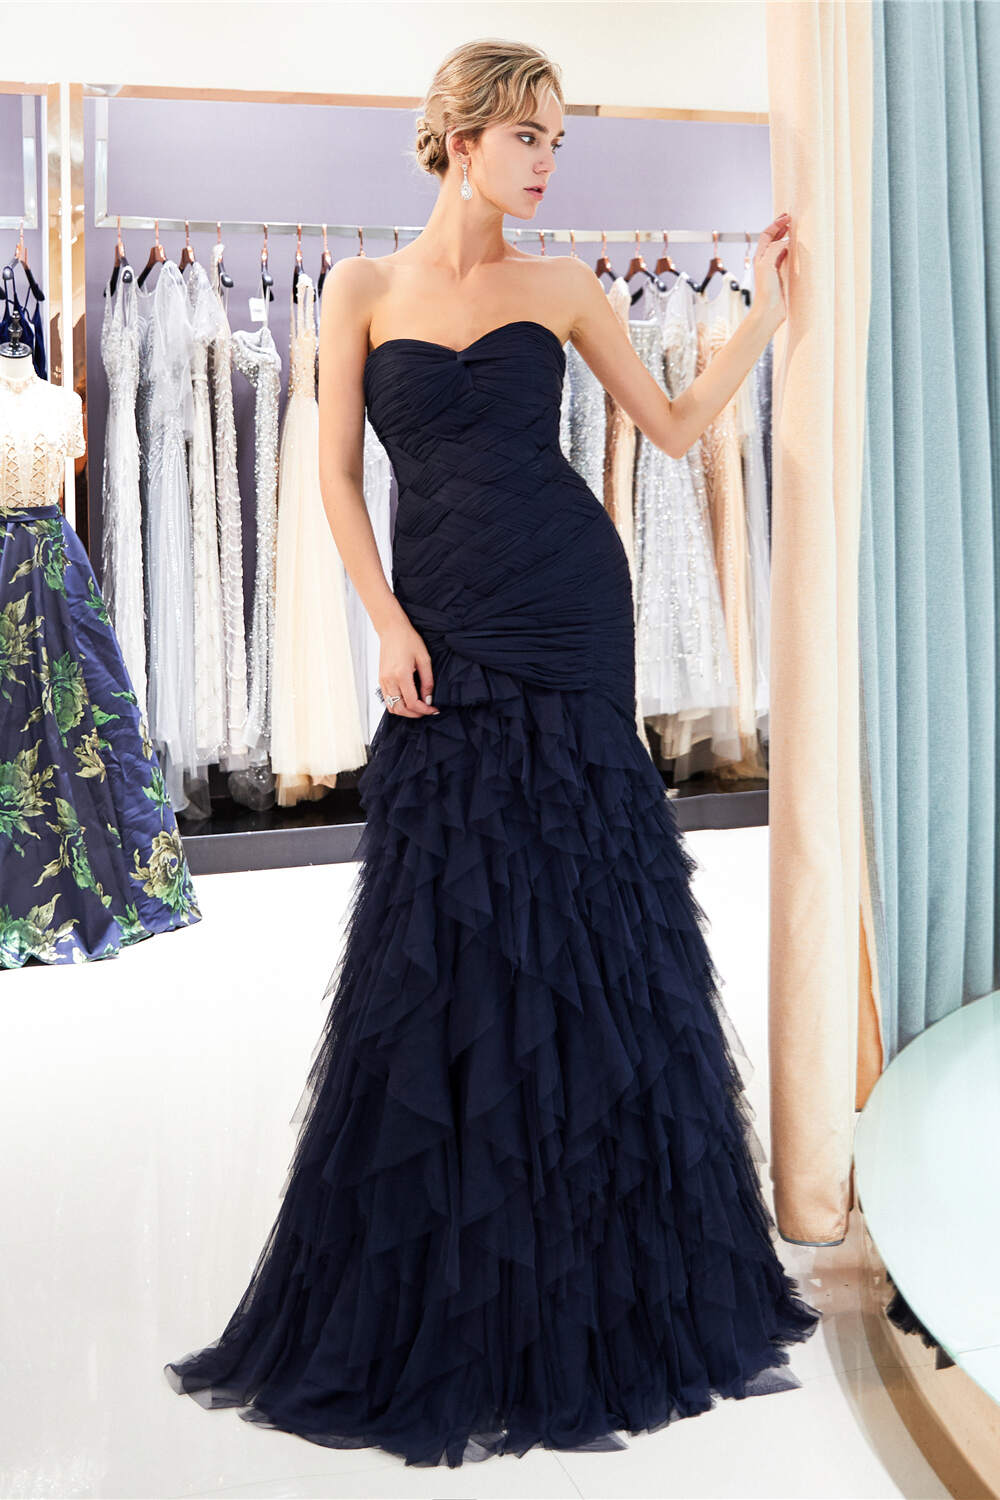 Dress To Impression, Navy Blue Sheath Sweetheart Strapless Draped Tulle Pleats Prom Dresses